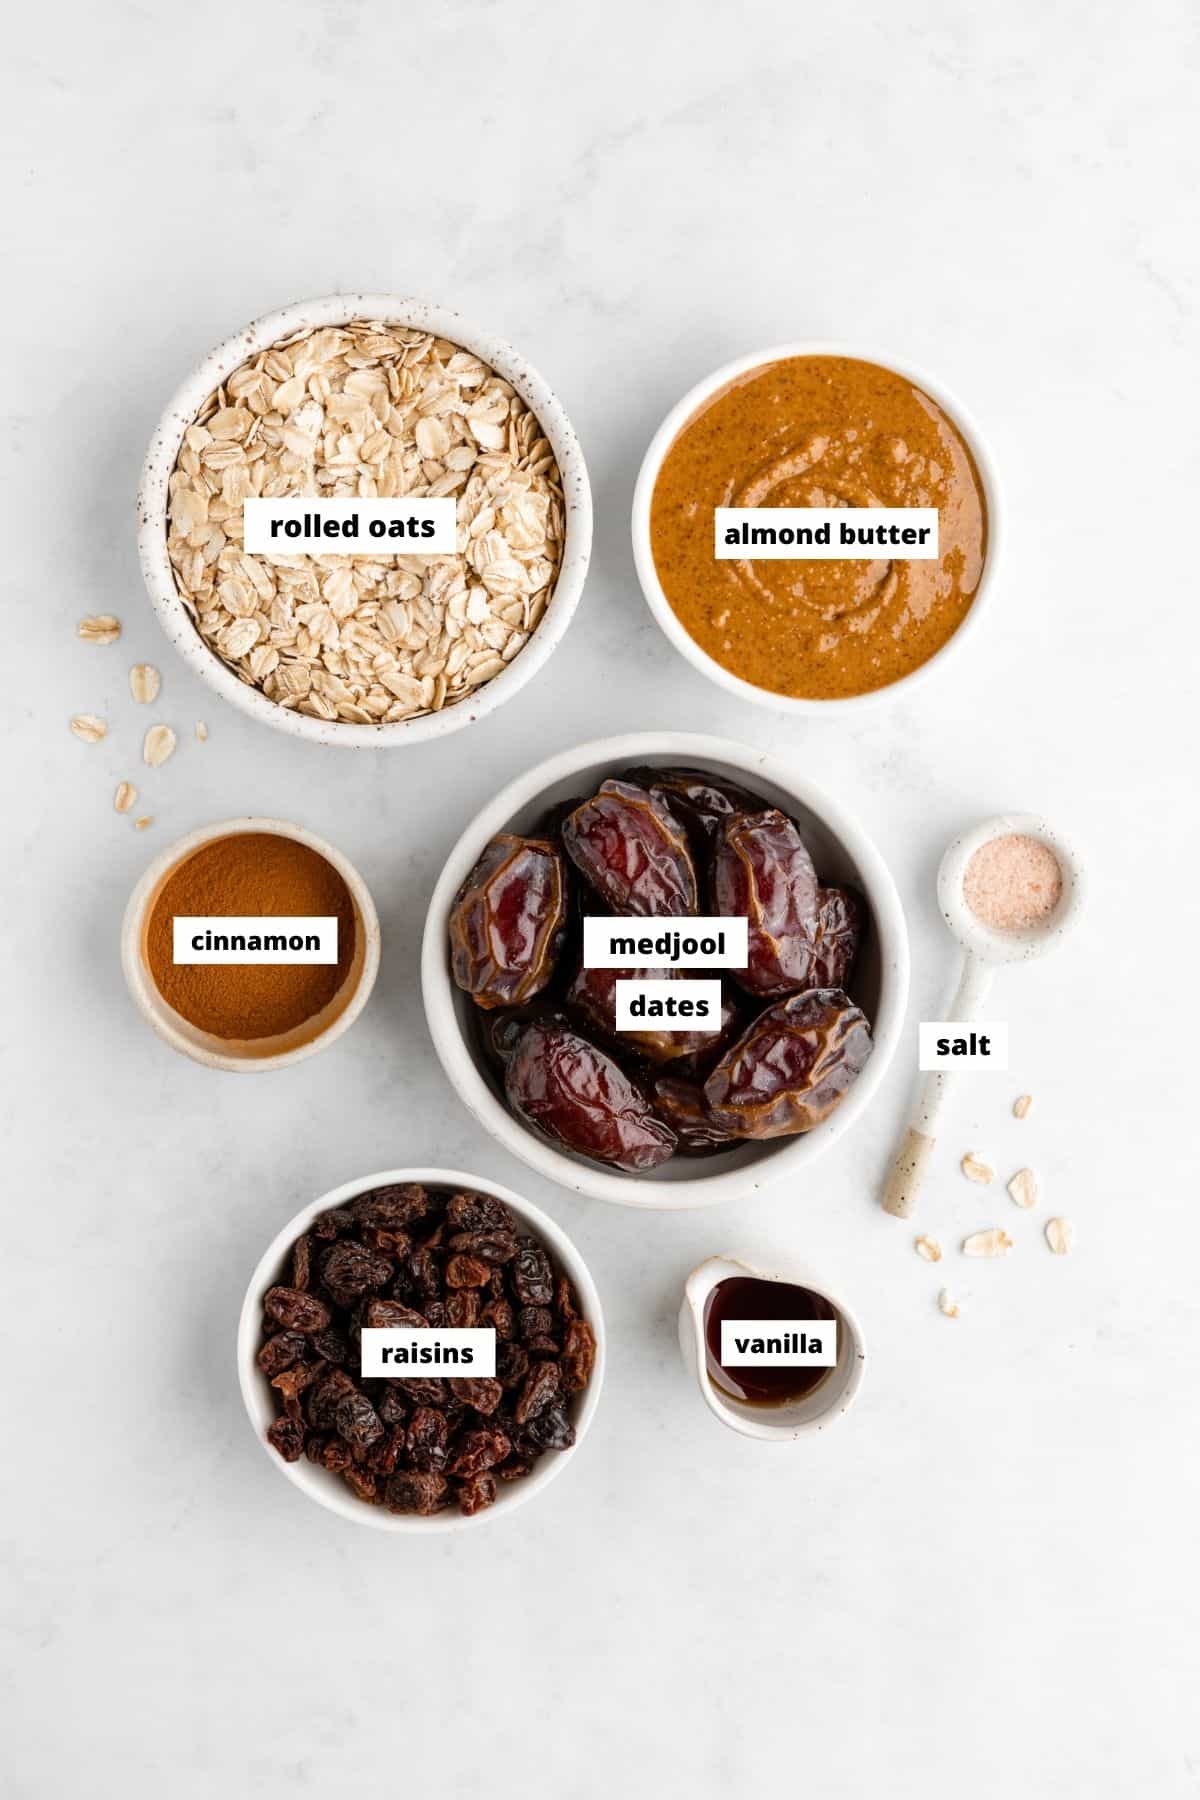 small bowls with medjool dates, rolled oats, almond butter, raisins, cinnamon, and vanilla extract